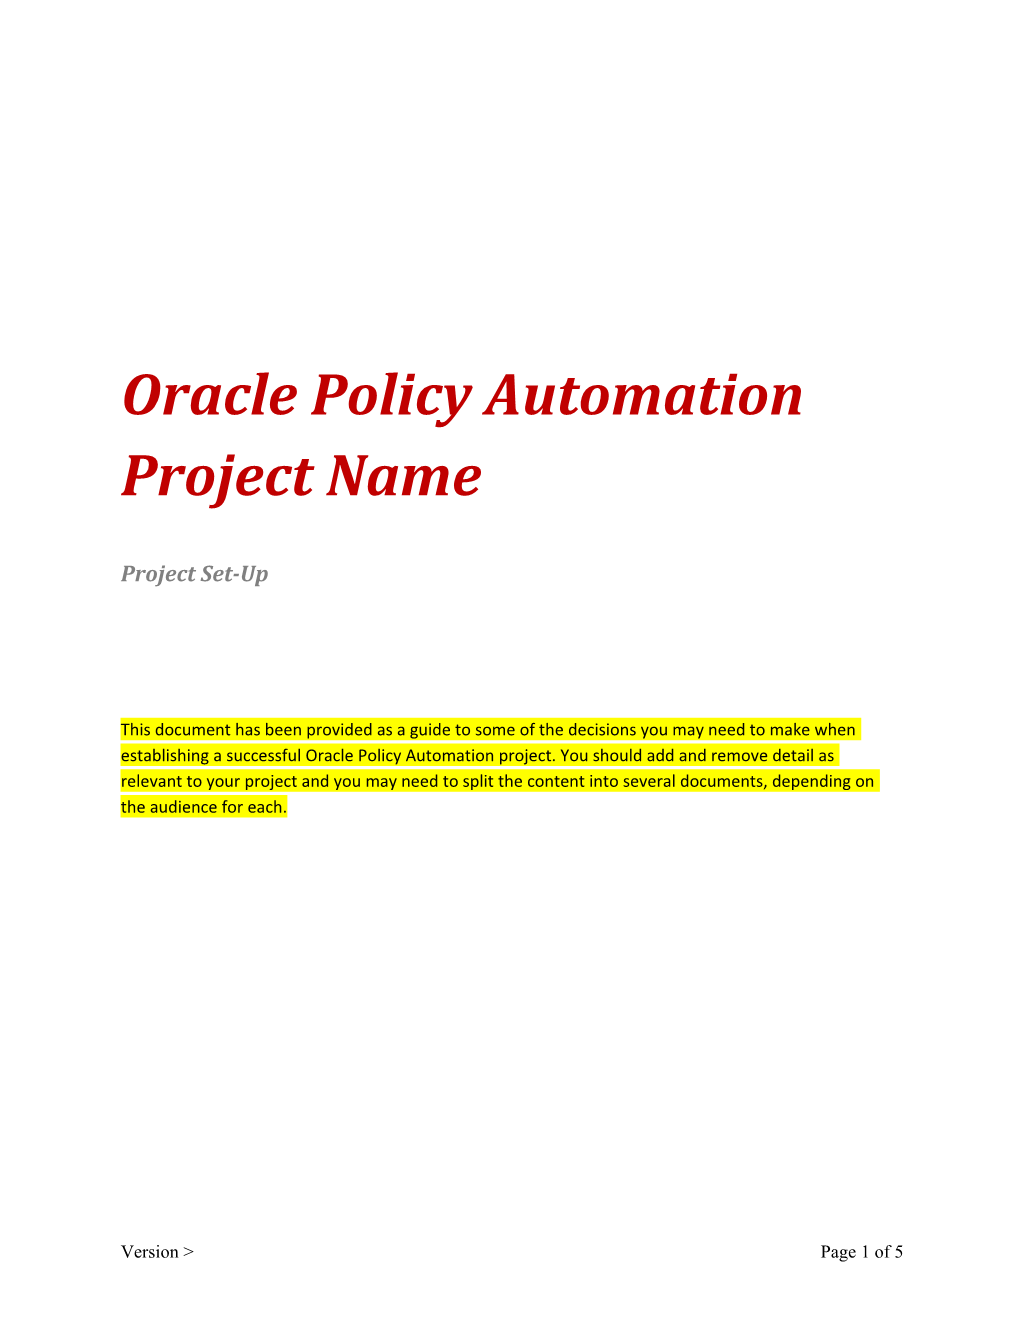 Oracle Policy Automation Project Name